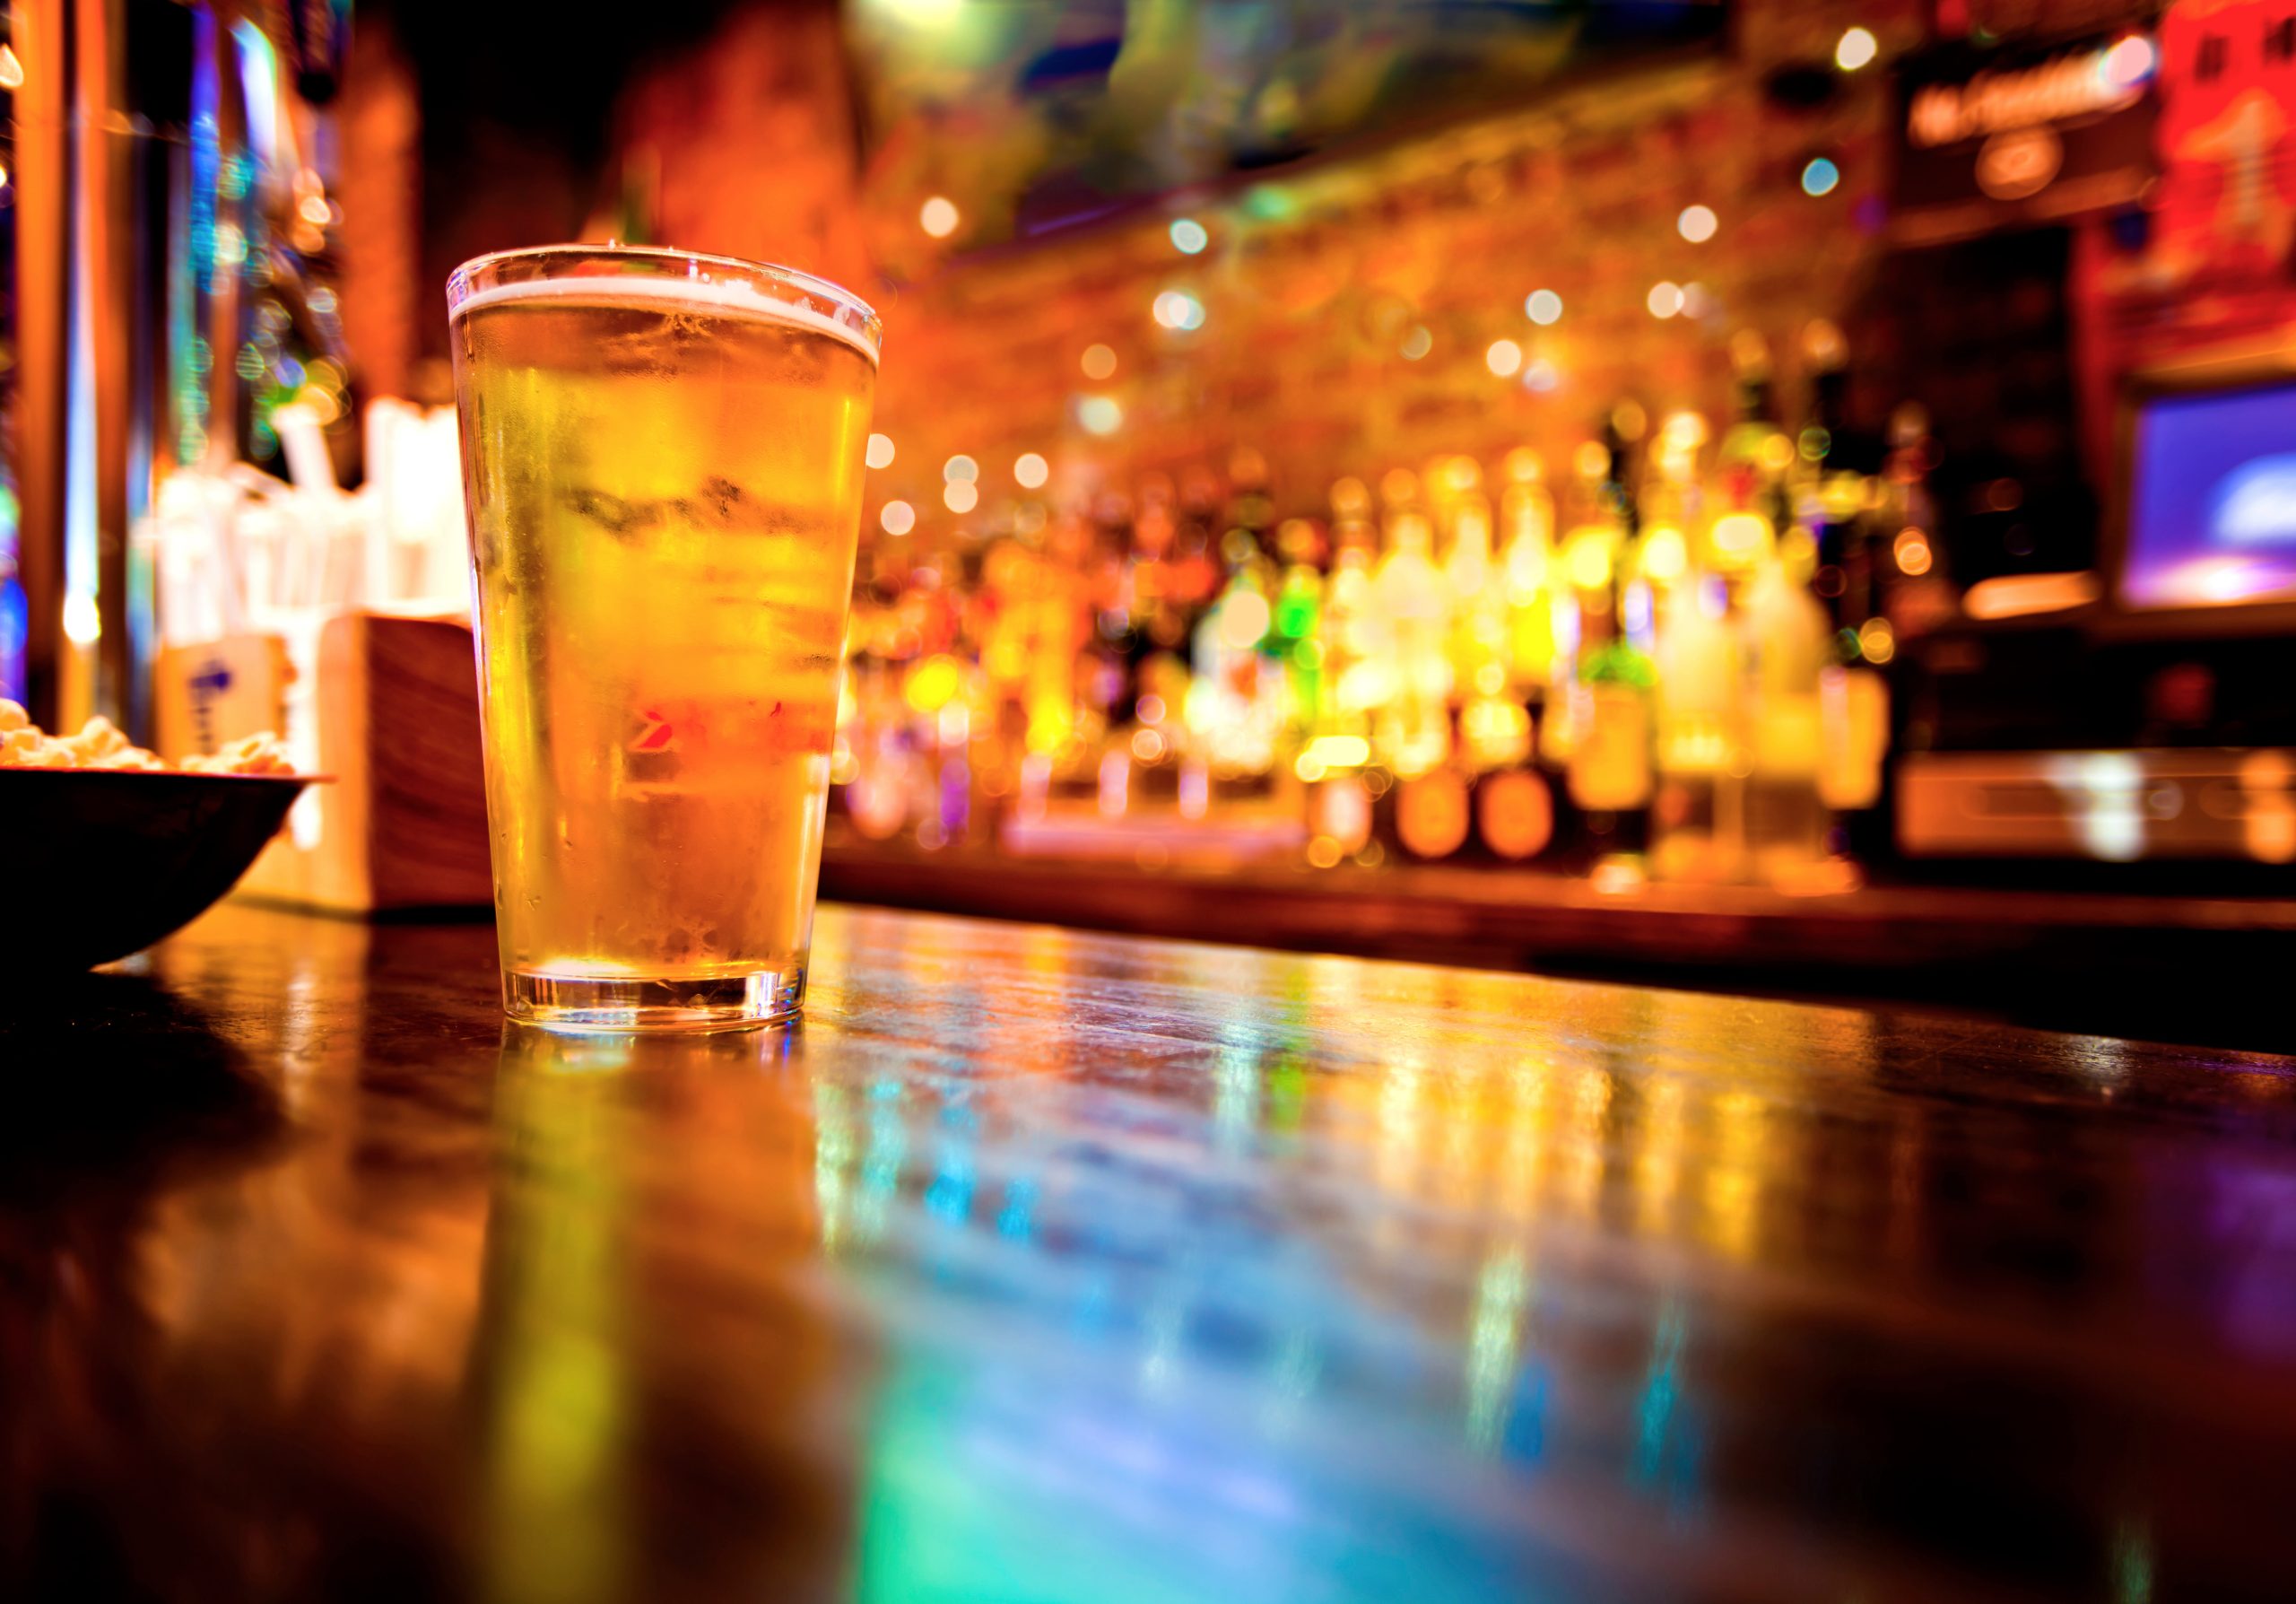 A premises licence is needed if you want to sell alcohol or offer entertainment from a particular venue.